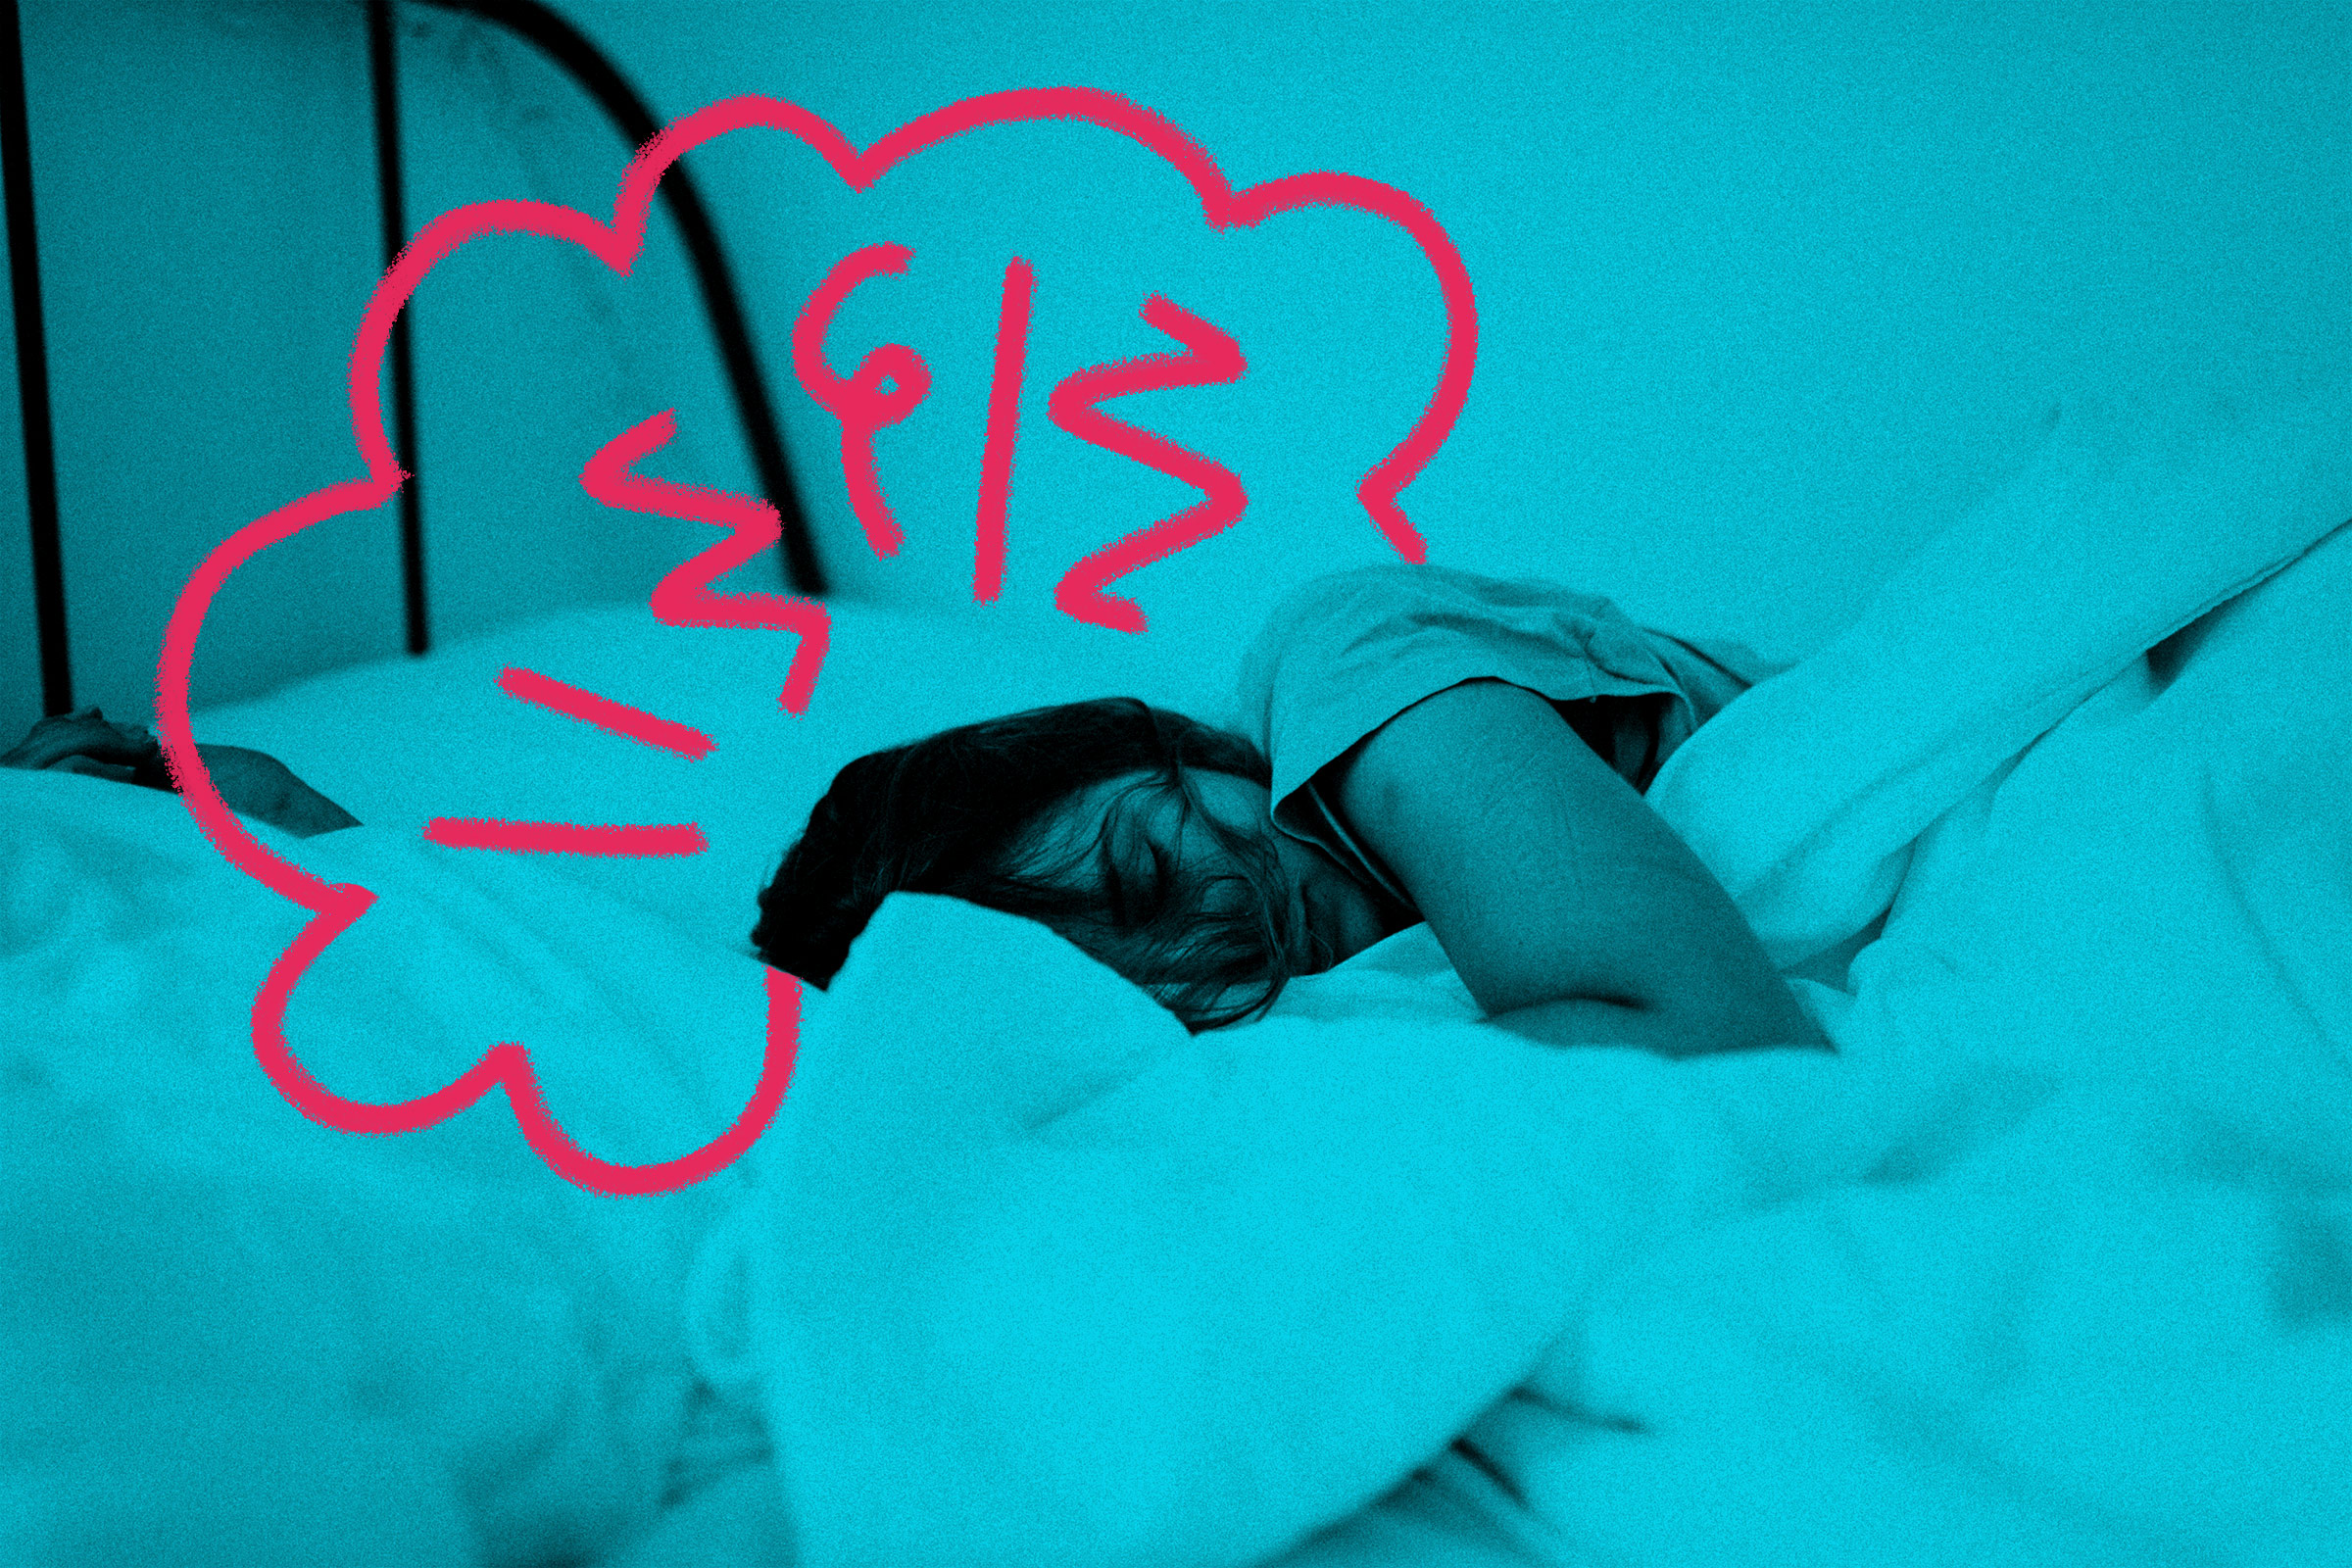 Woman lying in bed with thought cloud full of stress symbols above her head